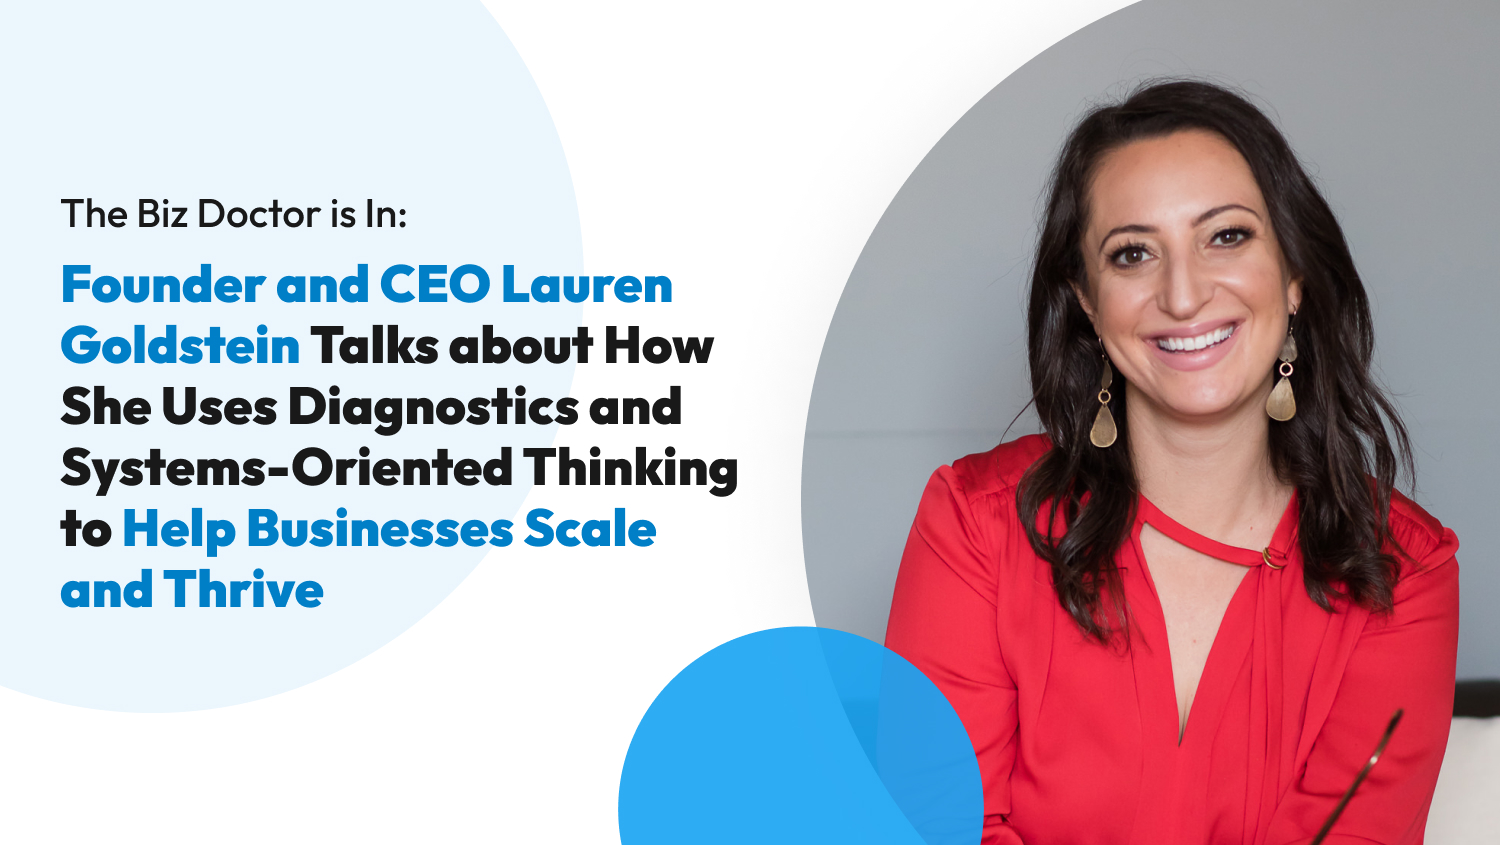 The Biz Doctor is In: Founder and CEO Lauren Goldstein Talks about How She Uses Diagnostics and Systems-Oriented Thinking to Help Businesses Scale and Thrive